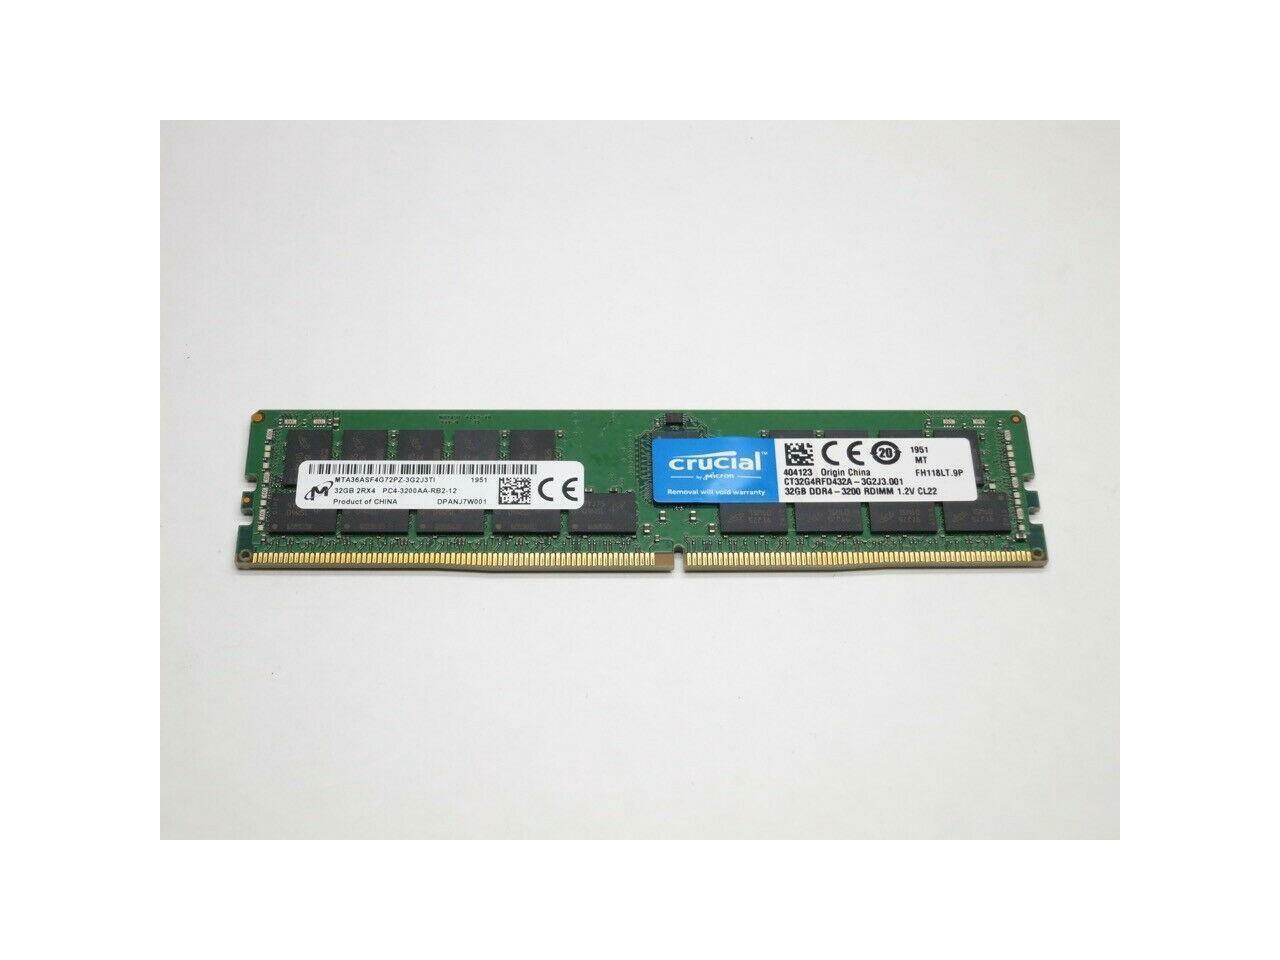 Crucial 32GB DDR4 3200MHz PC4-25600 Server Memory for ASRock Rack EPYCD8-2T LOT